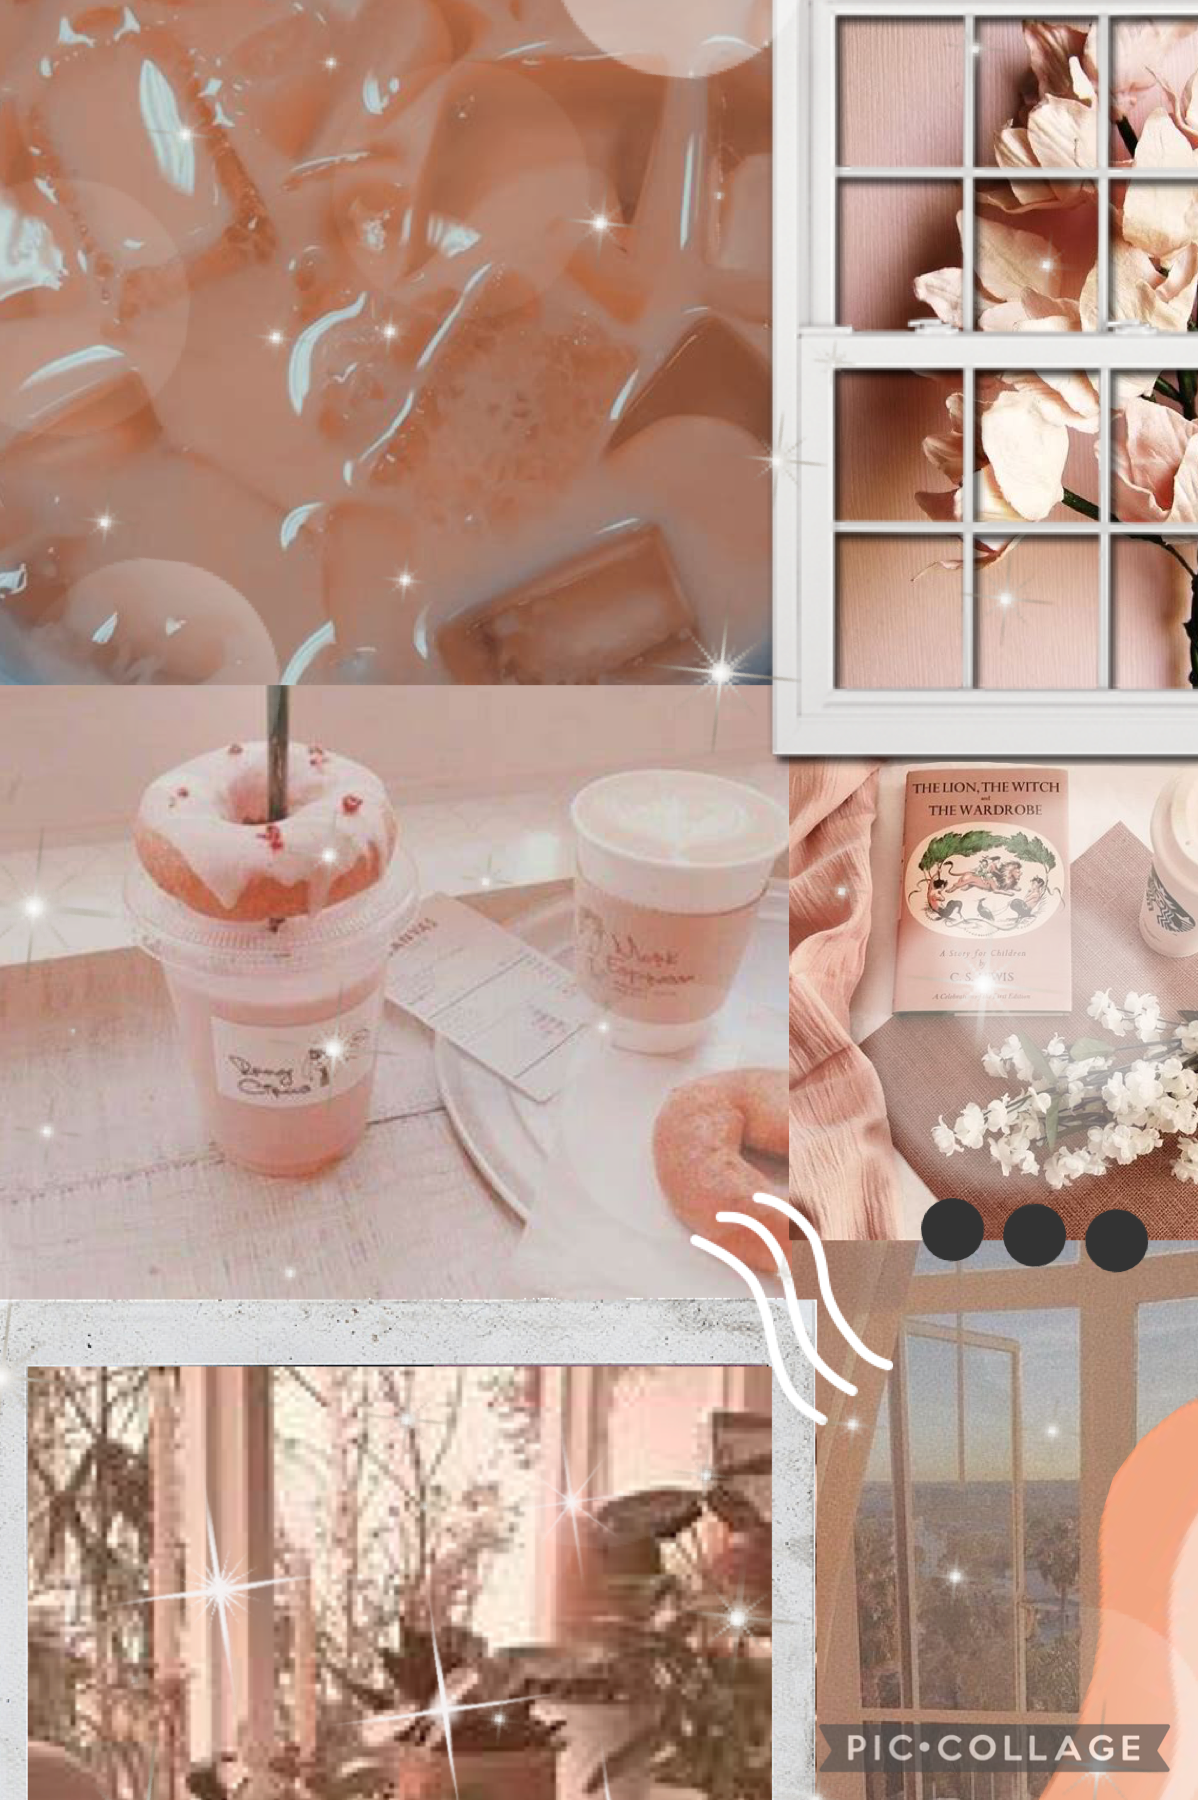 Tapp! 
Soft peachy aesthetic 💕~~~~~~ Srry I haven’t posted in a while💕✨~~~~ Let’s get 180 followers by next month!! 😄 We can do it 💕💕